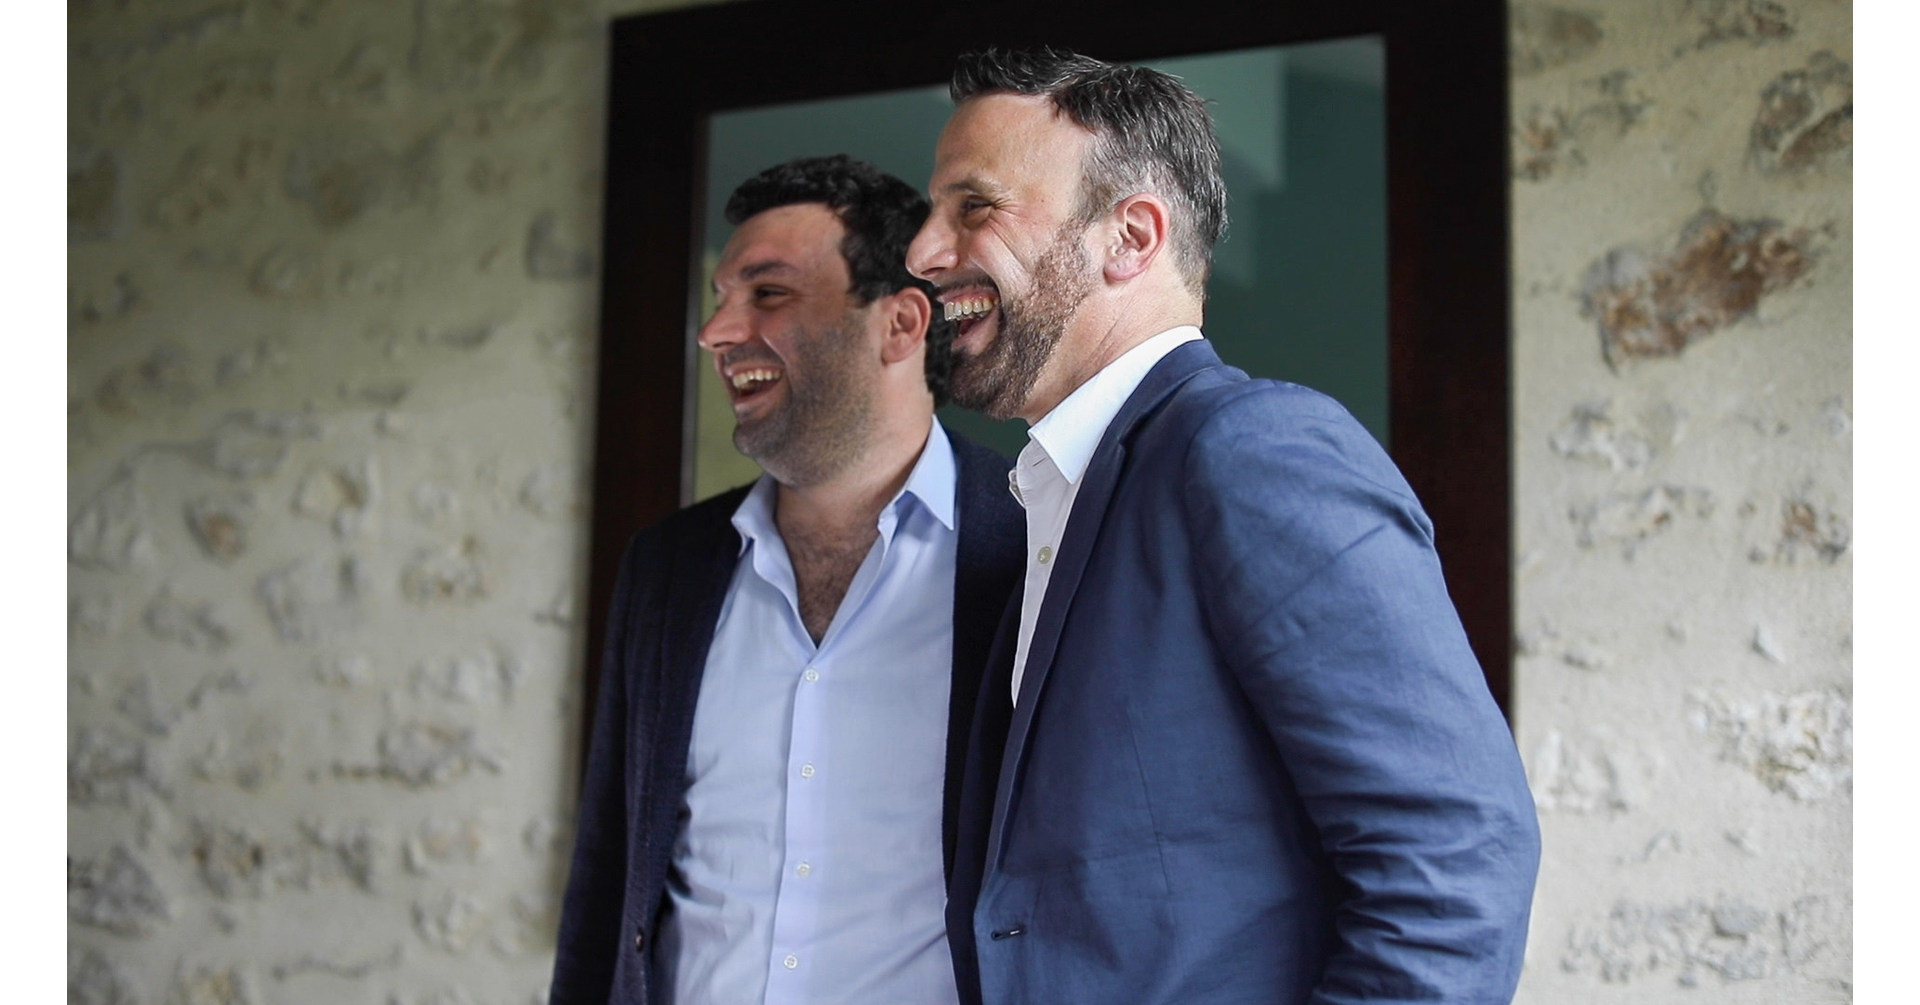 Jonathan Cherki, CEO & Founder of Contentsquare and Shlomi Hagai, CEO of Clicktale. Contentsquare acquired Clicktale in July 2019.